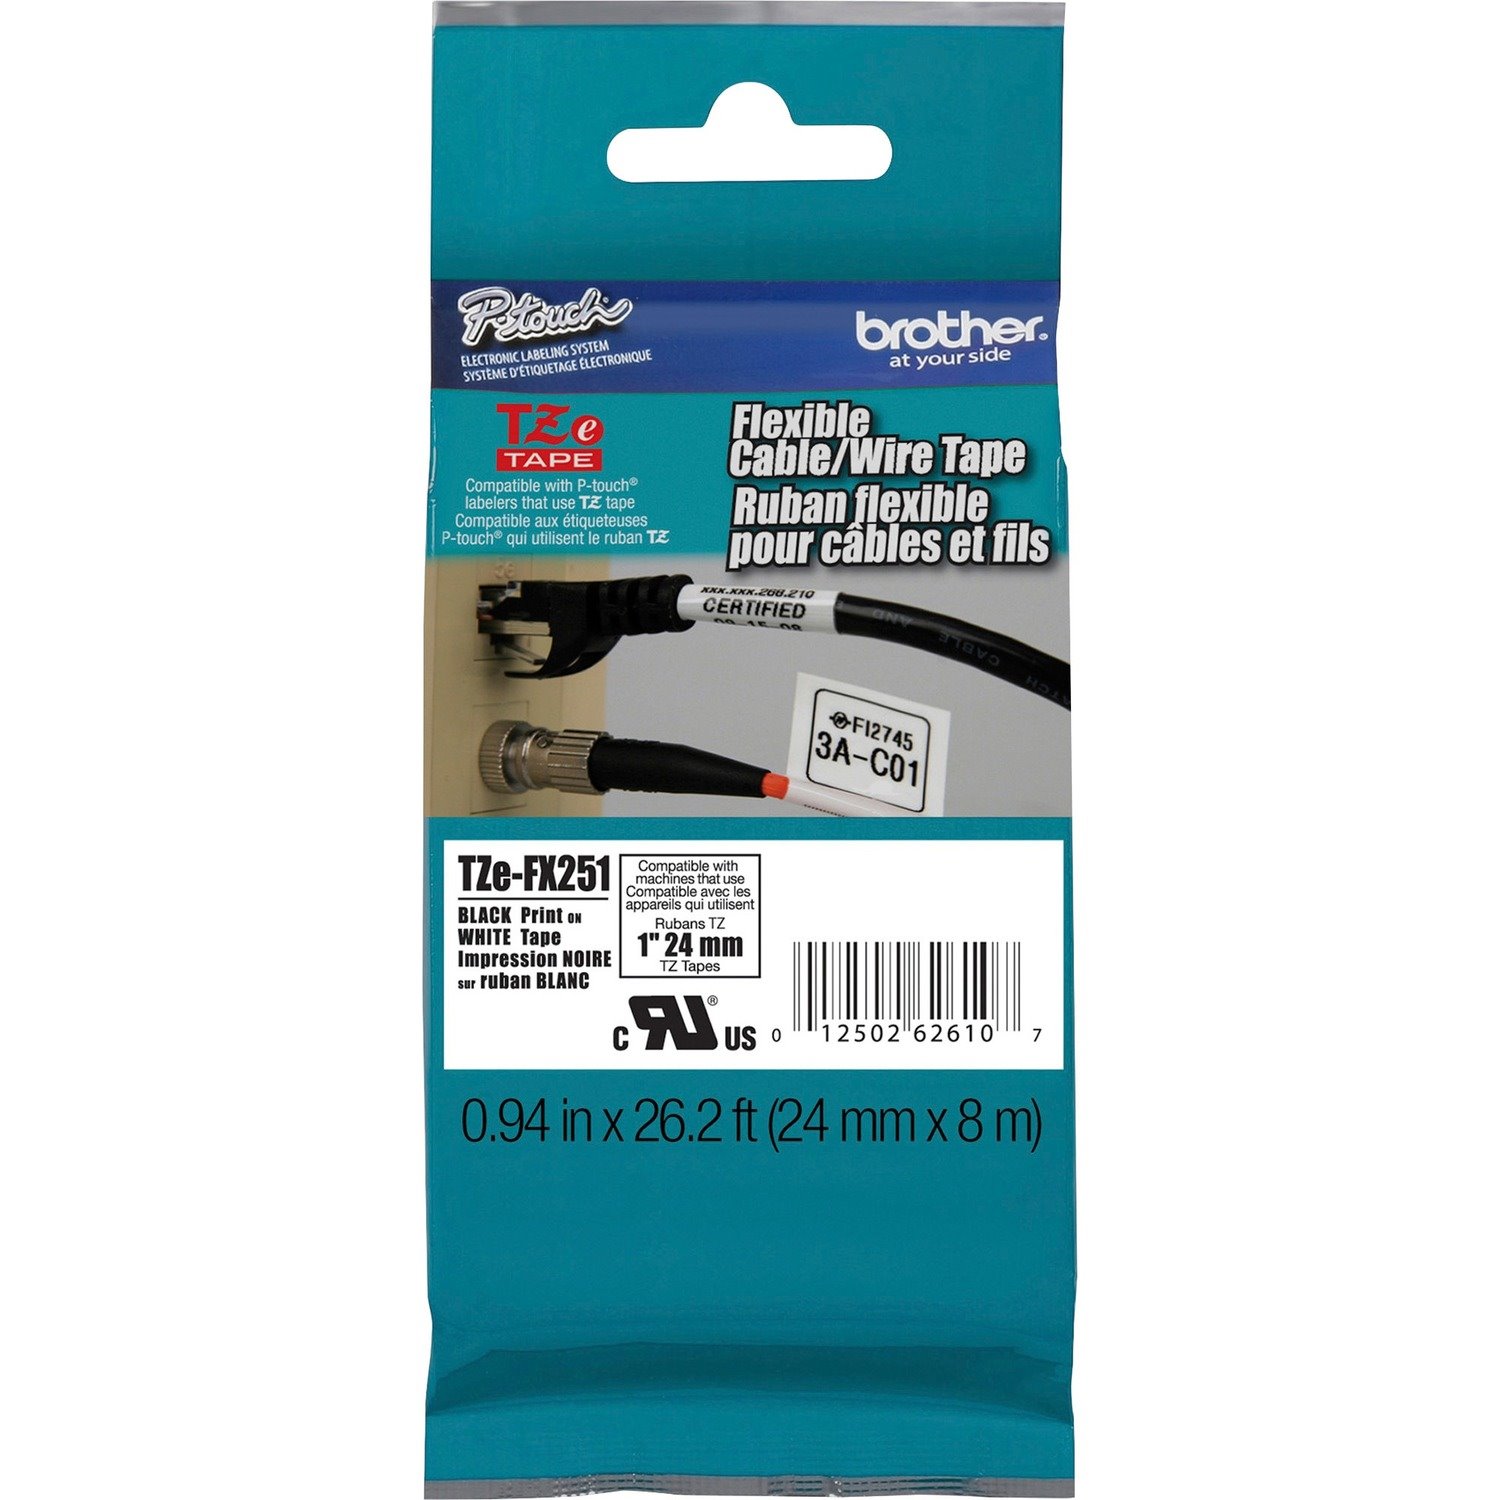 Brother 1" Black on White Flexible ID Tape